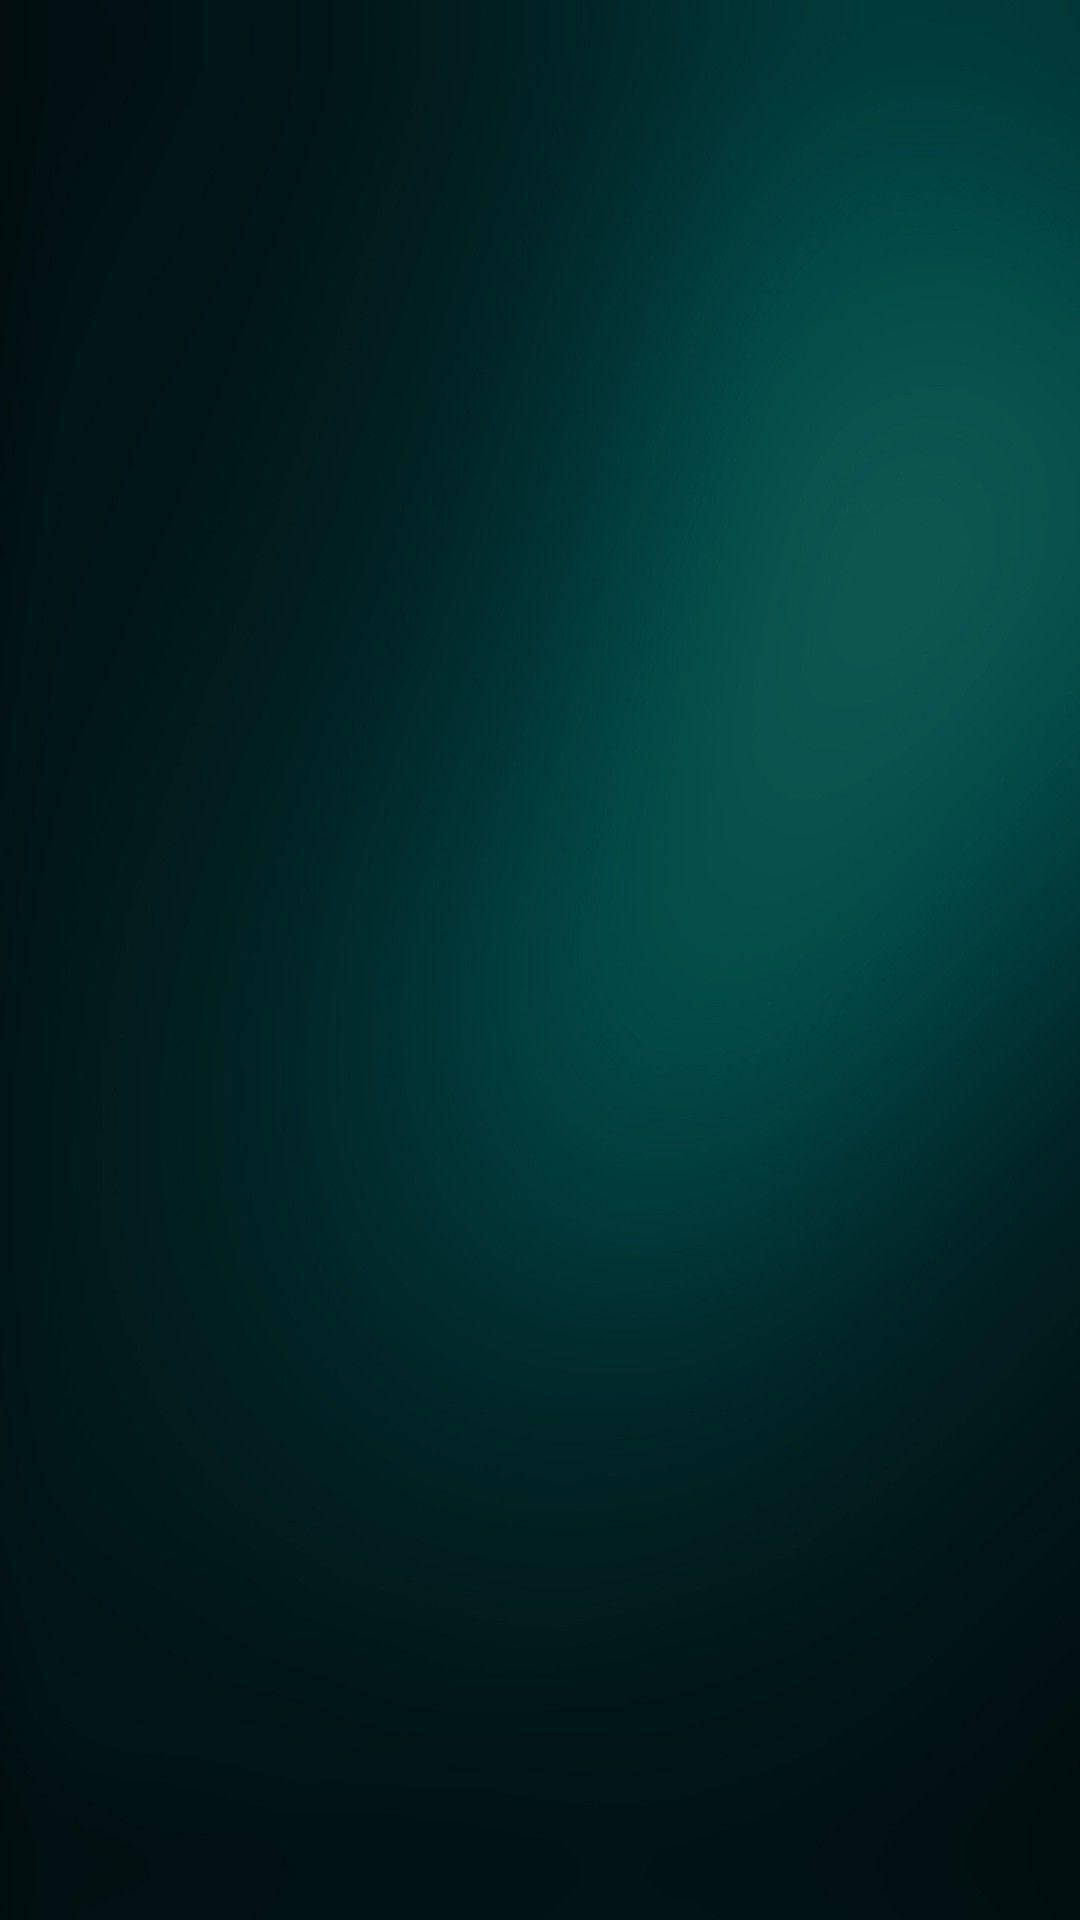 Dark Green 1080X1920 Wallpaper and Background Image